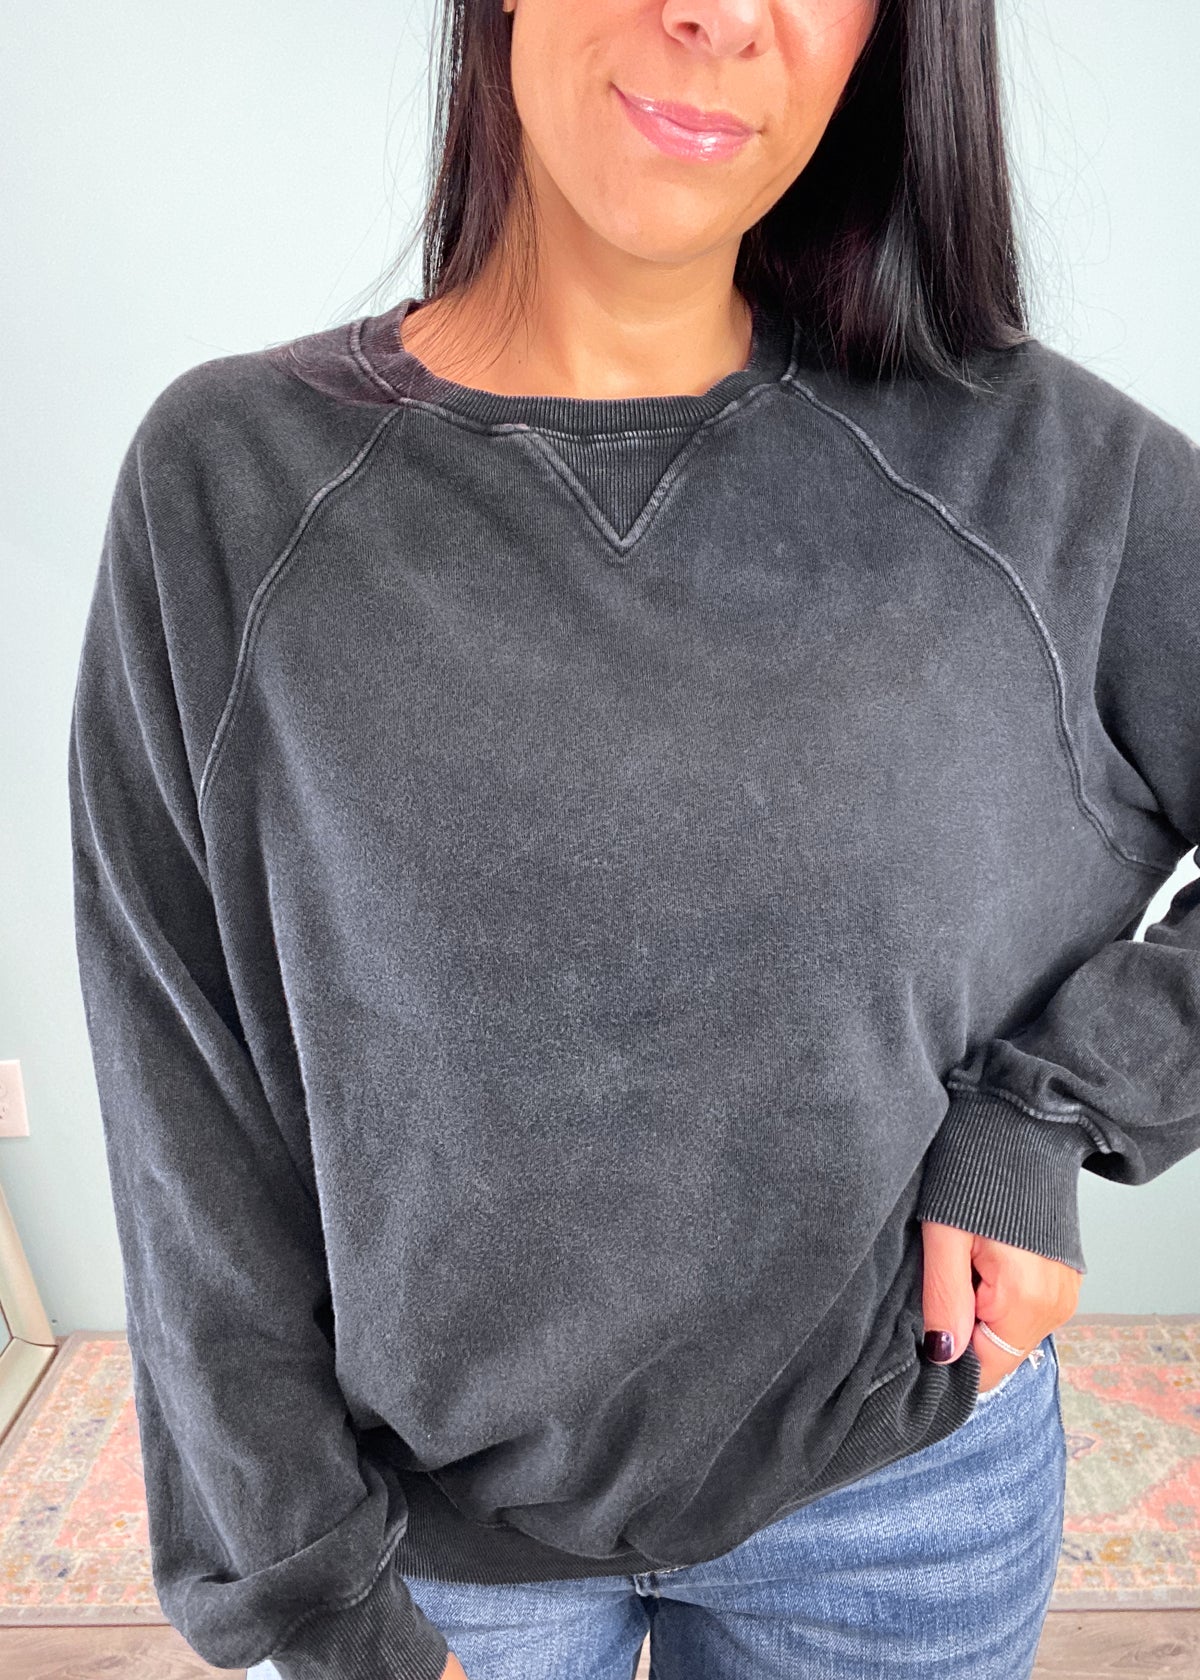 'Nostalgia' Black Vintage Washed Crewneck Sweatshirt-What is better than a soft, brushed, wear it with everything black sweatshirt?! Add your favorite jewelry layers and make this a casual night out outfit as well as an everyday cozy option! -Cali Moon Boutique, Plainville Connecticut